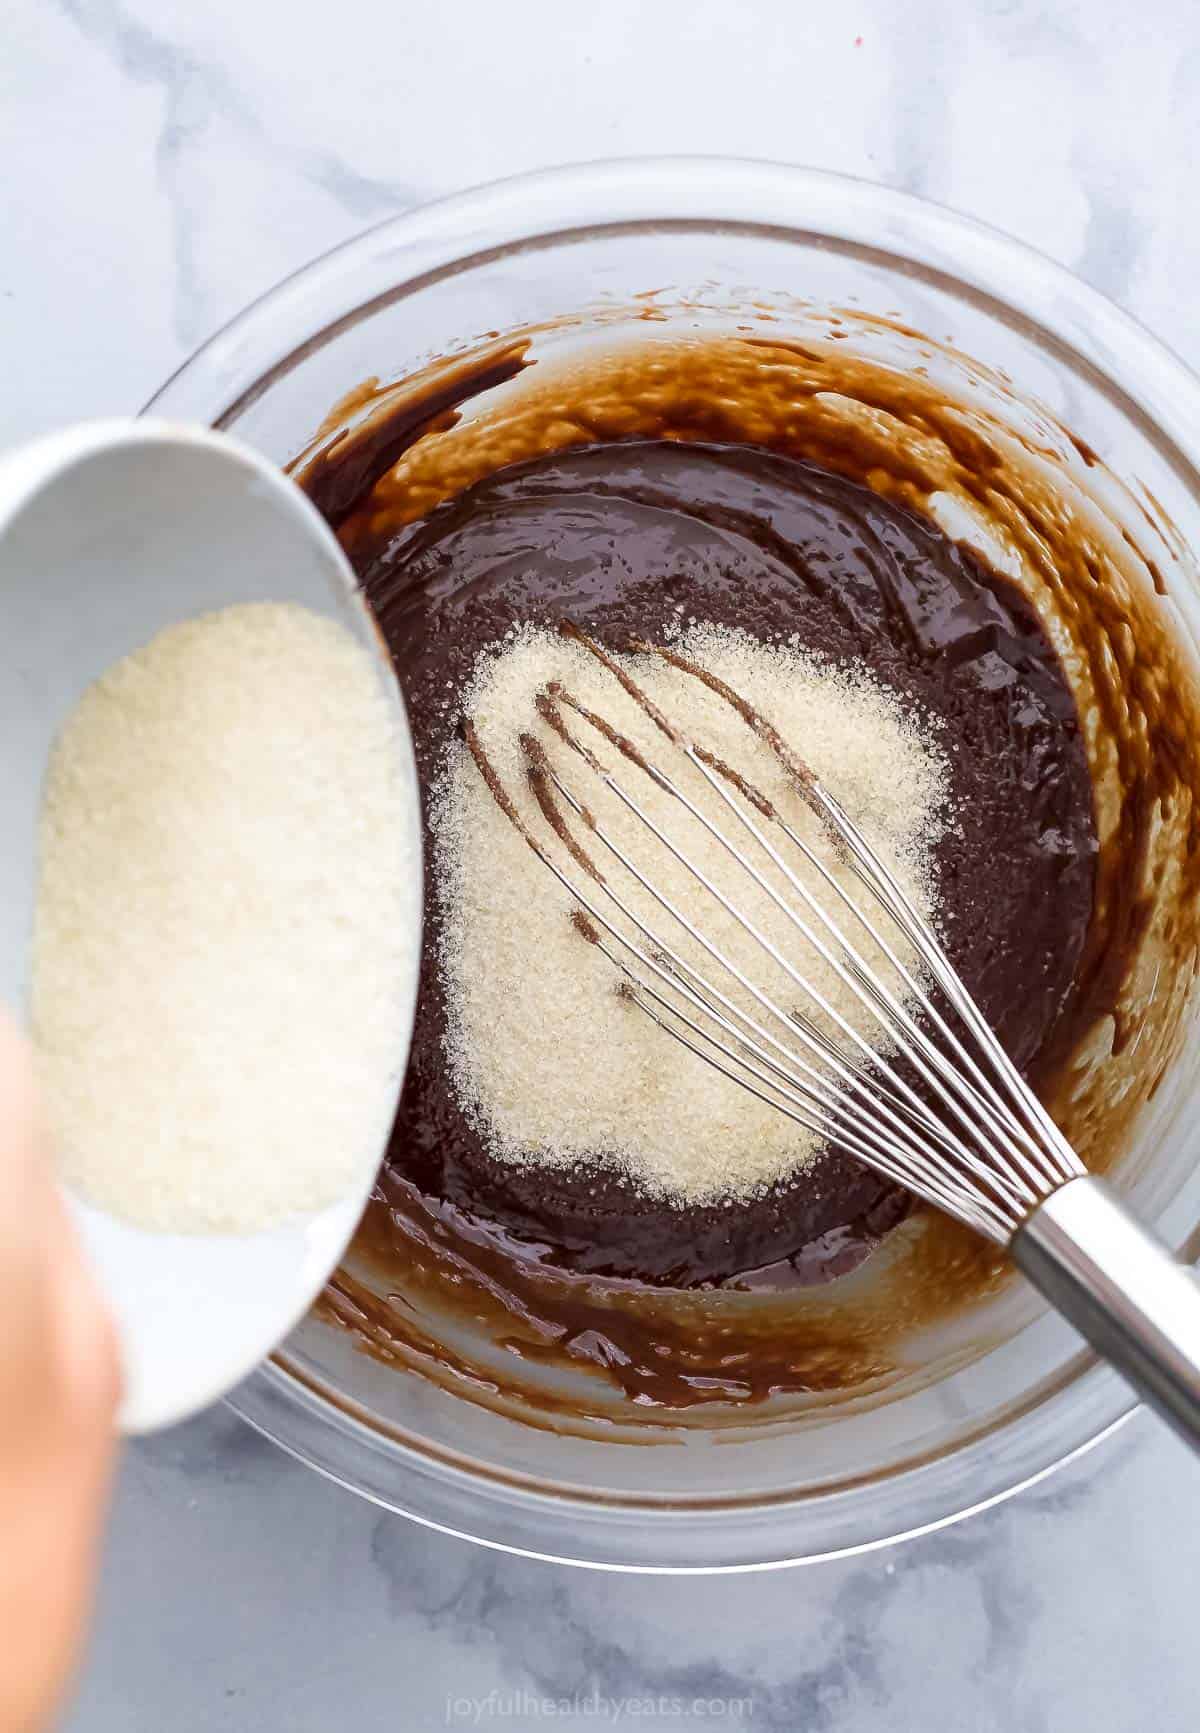 Sugar being poured into a large glass bowl containing brownie batter and a metal whisk